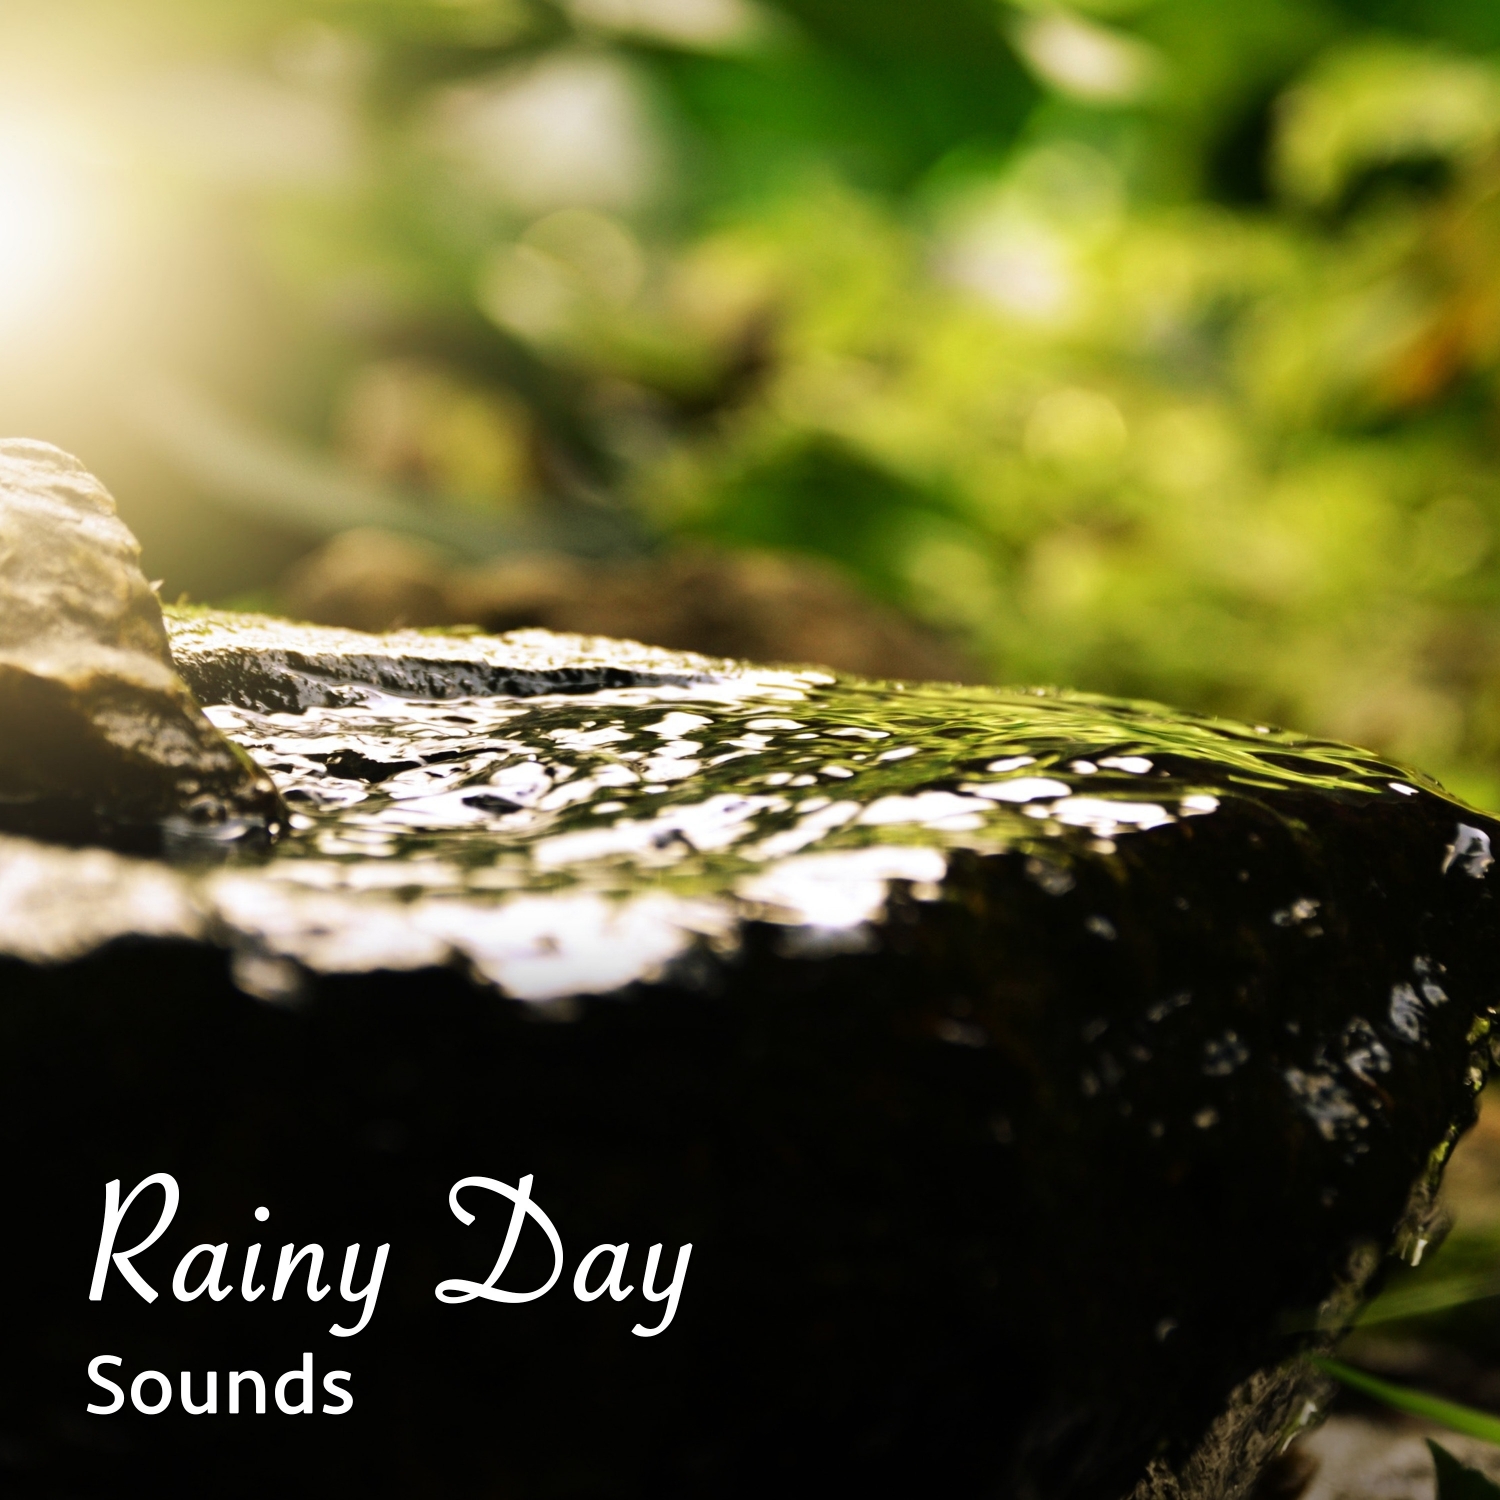 19 Rainy Day Sounds to Block out Noise and Sleep Peacefully